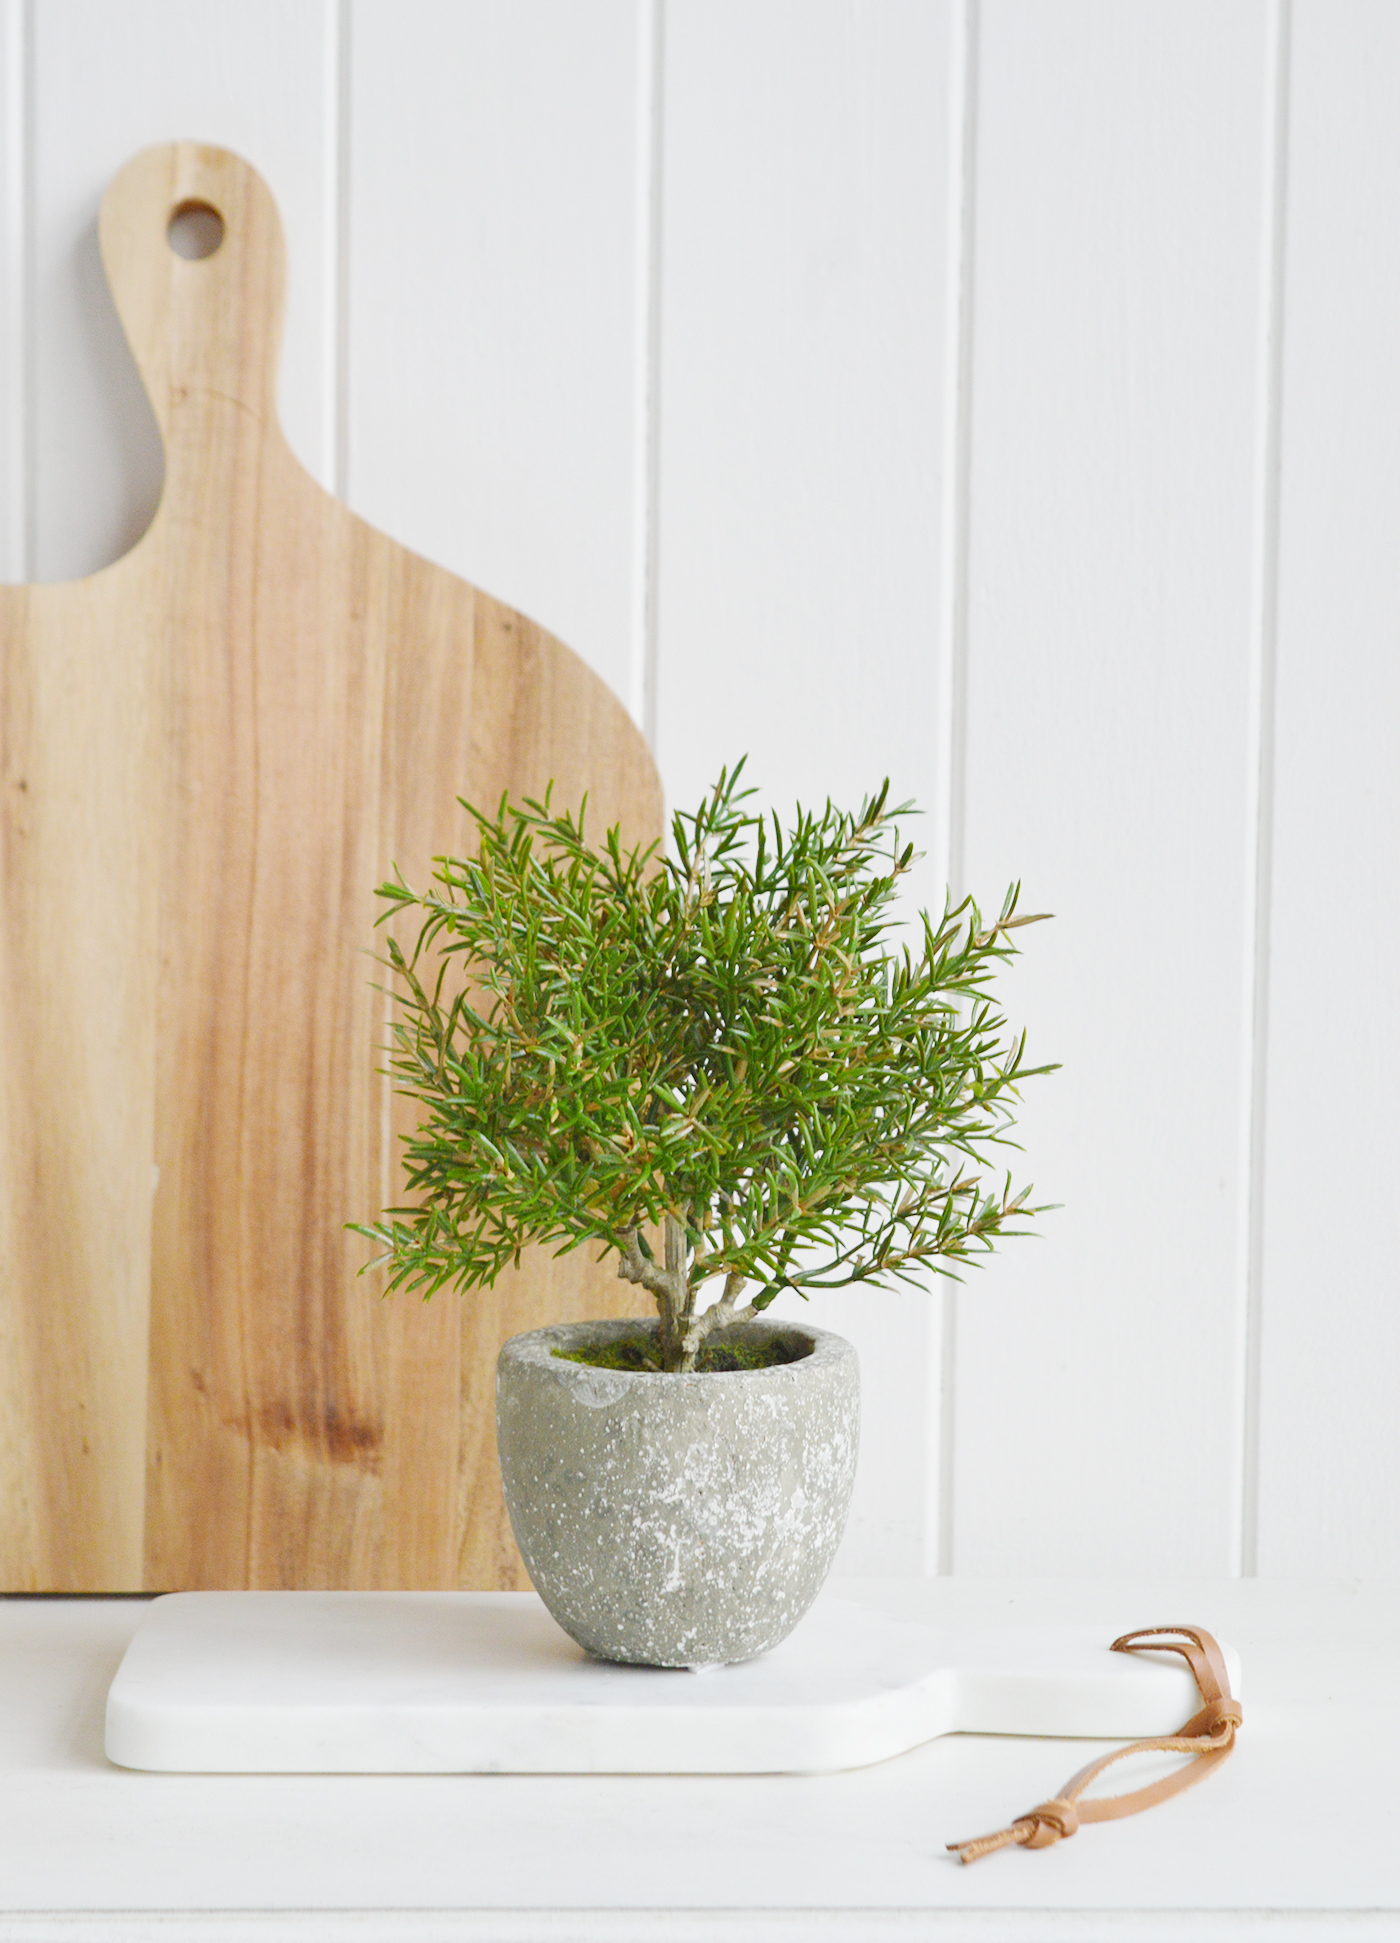 Artificial greenery small potted Rosemary Bush  for styling New England style  interiors. Farmhouse, country, coastal and city homes